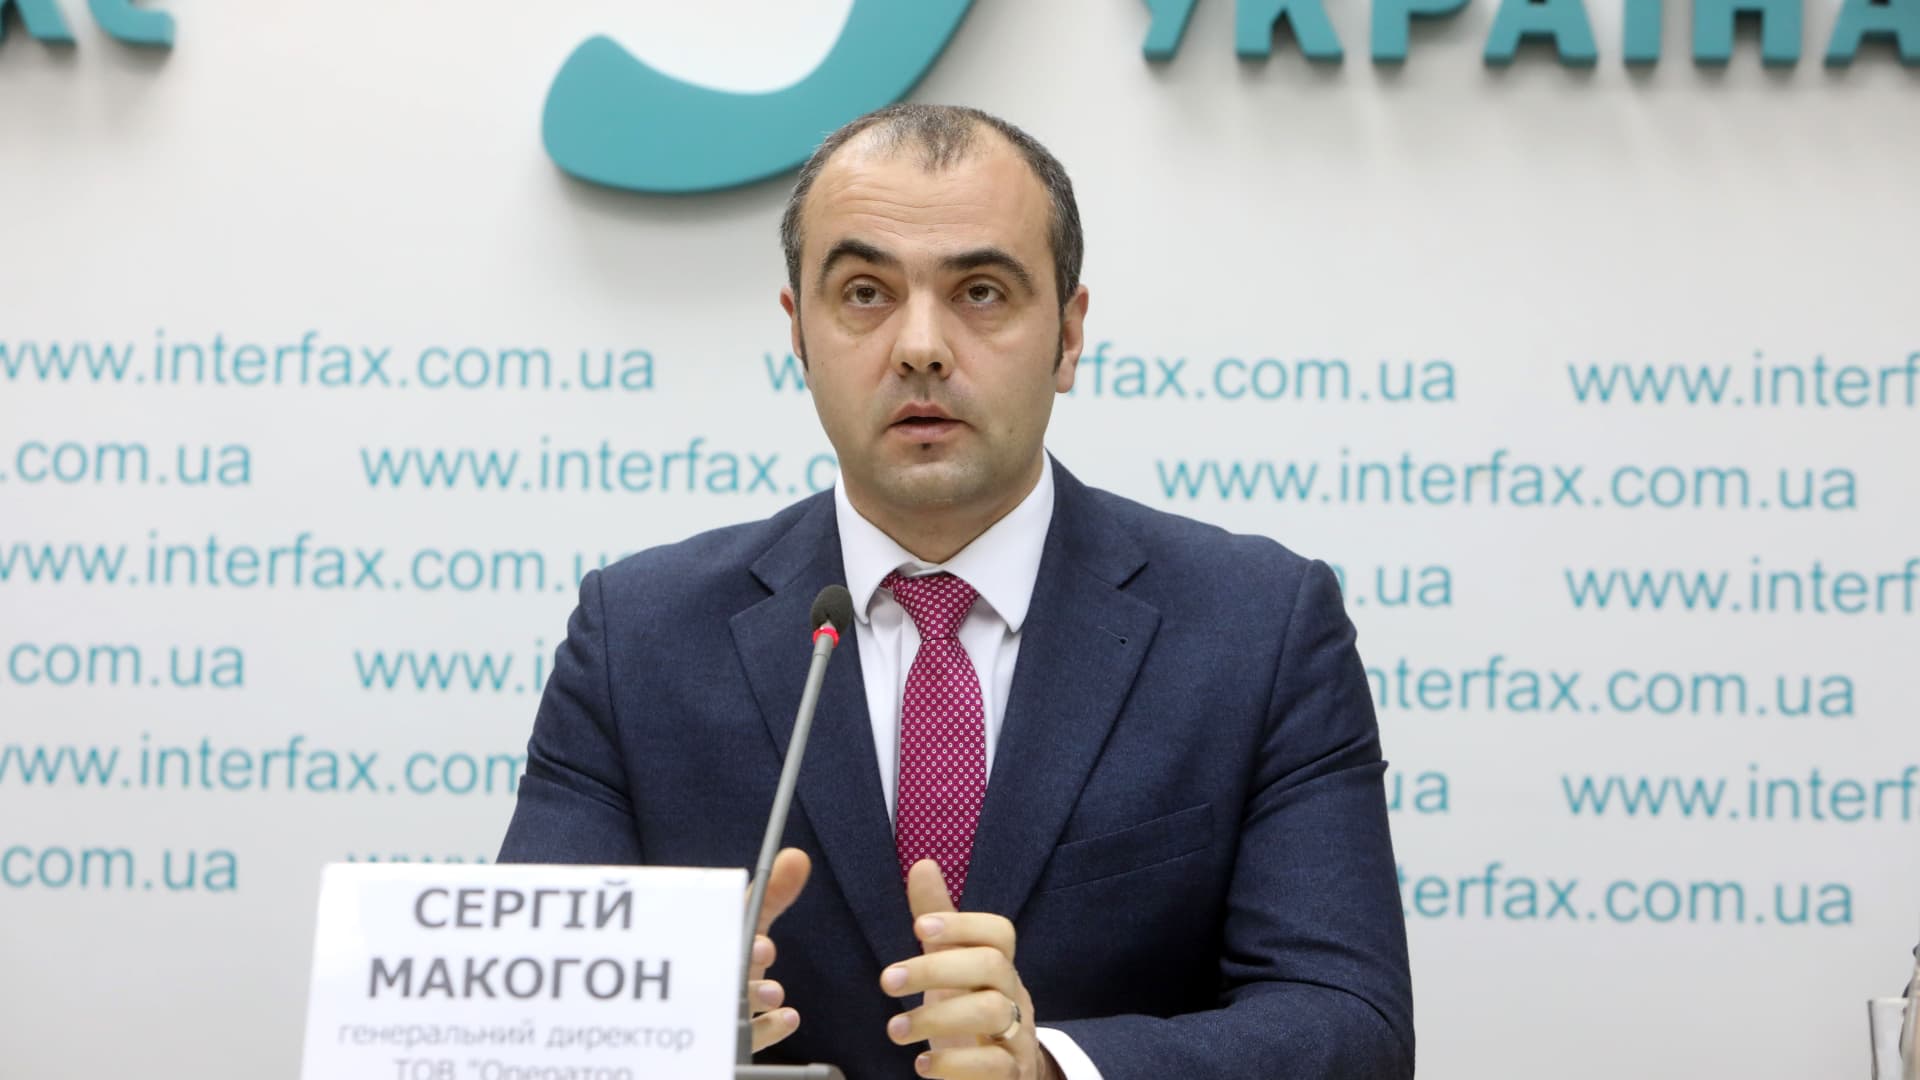 KYIV, UKRAINE: Director General of Gas Transmission System Operator of Ukraine LLC (GTSOU) Serhiy Makogon. GTSOU will block Russian gas flows via two key entry points in Russian-occupied territory from Wednesday, May 11, 2022.